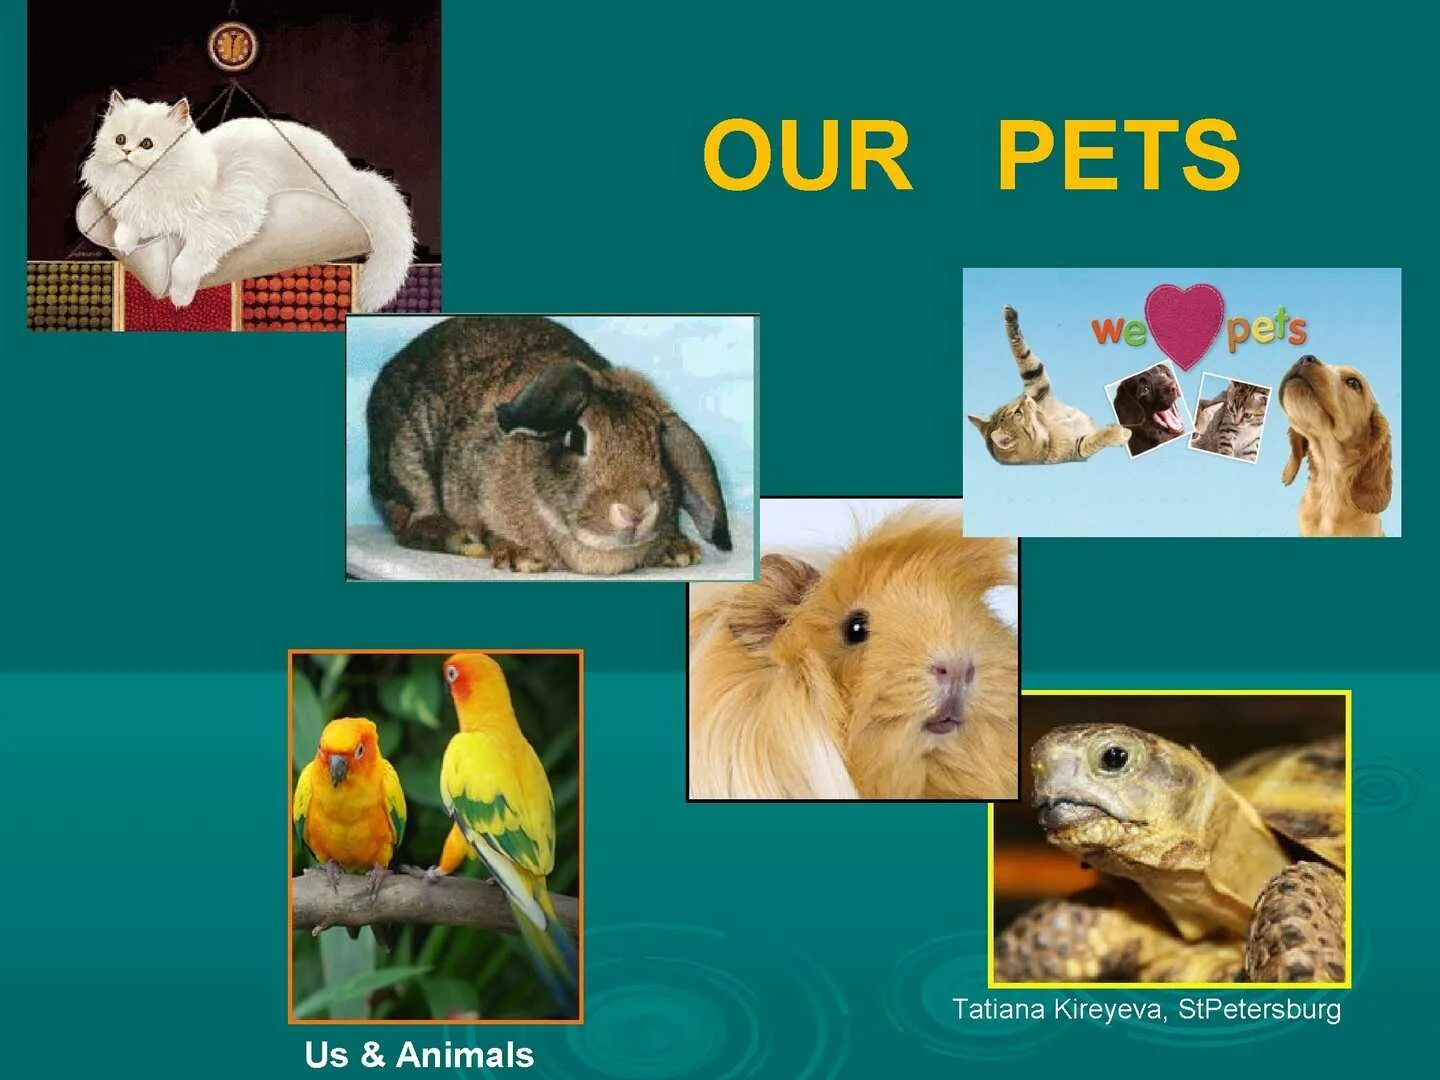 Keeping pets перевод. Our Pets. Feed our Pets картинки для детей. Importance Pets in our Lives. WORLDWALL Rainbow 5 our Pets.